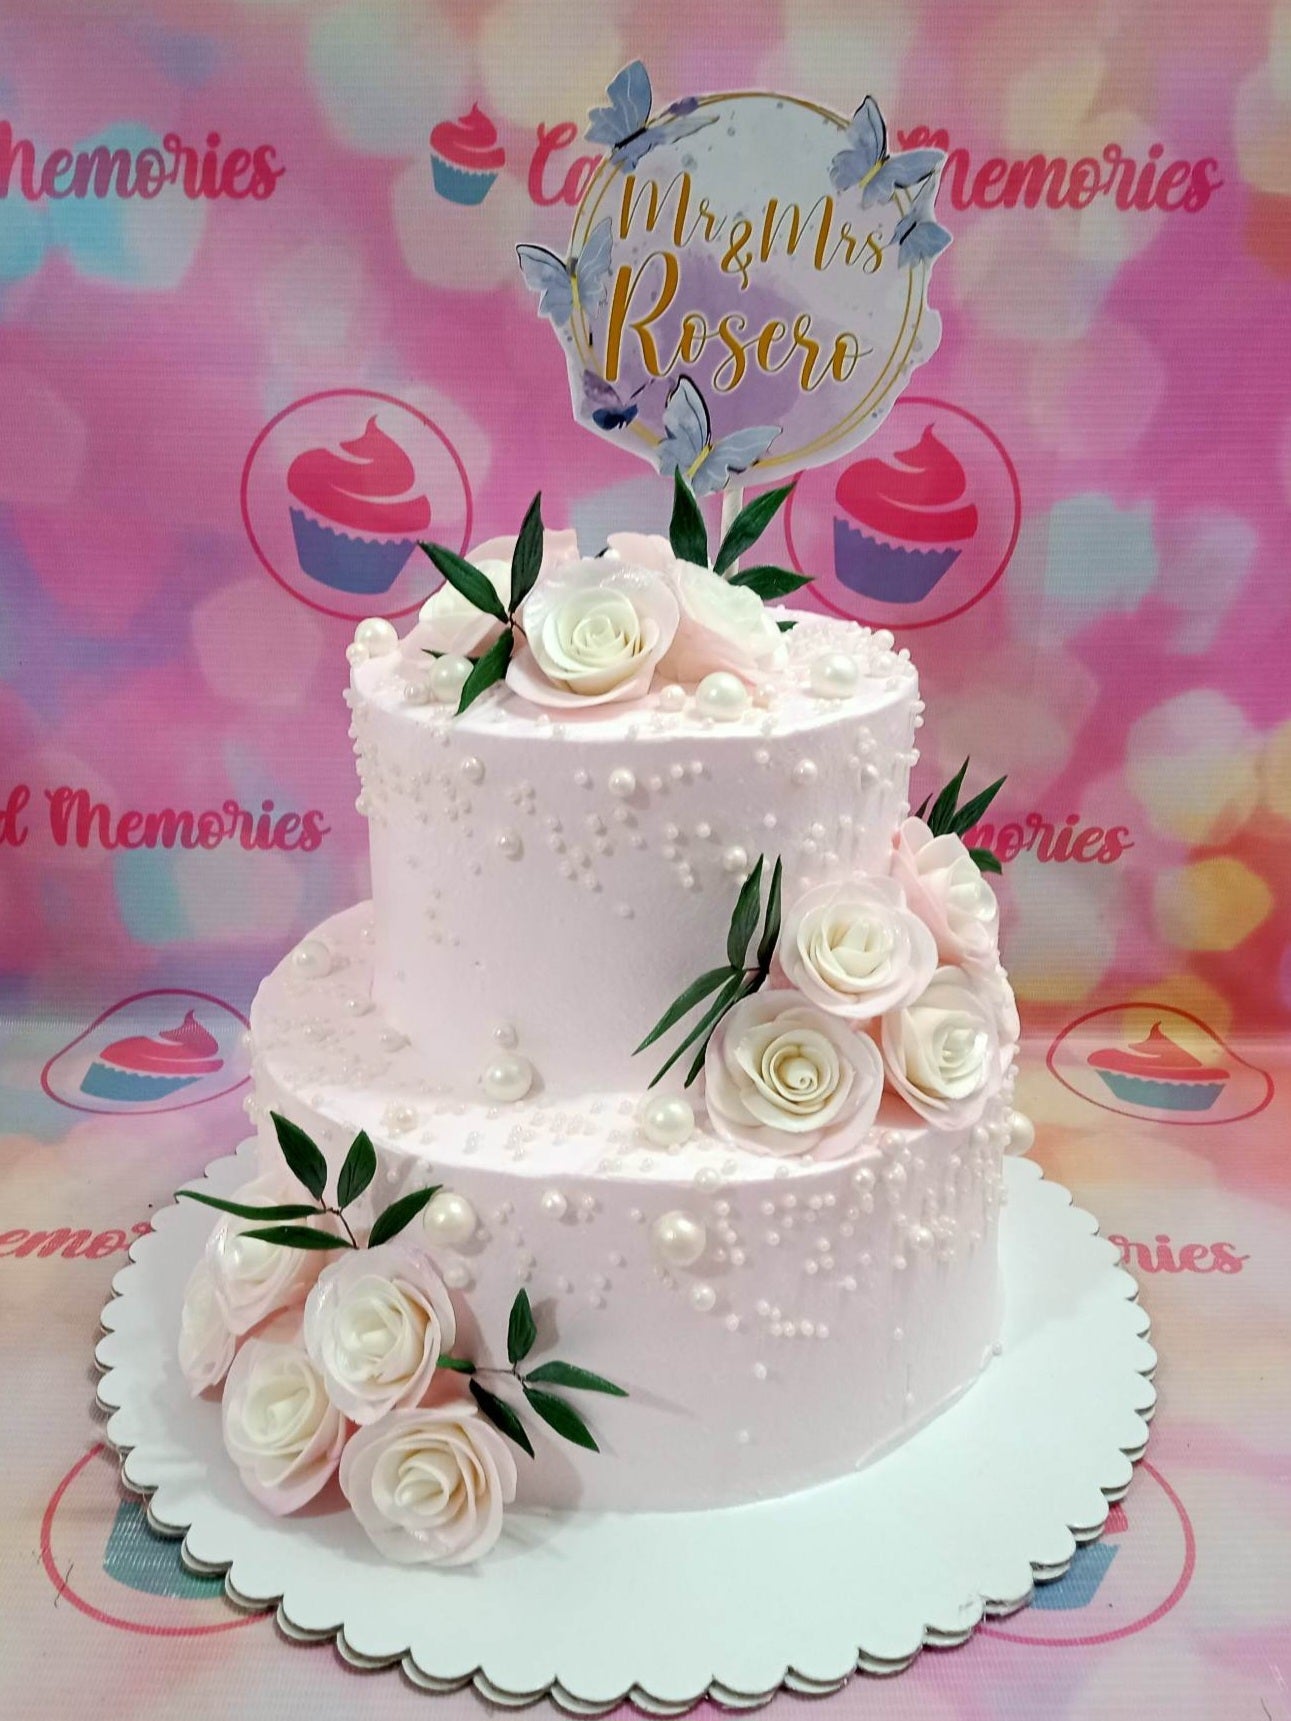 This beautiful, custom-decorated wedding cake is perfect for any special occasion. It features delicate pink roses, pearl dragees, and a butterfly topper, making it ideal for 20th, 30th, 40th, 50th, and 60th wedding anniversaries, birthdays, and weddings. Show your loved one your special feelings and make a wonderful celebration with this cake.